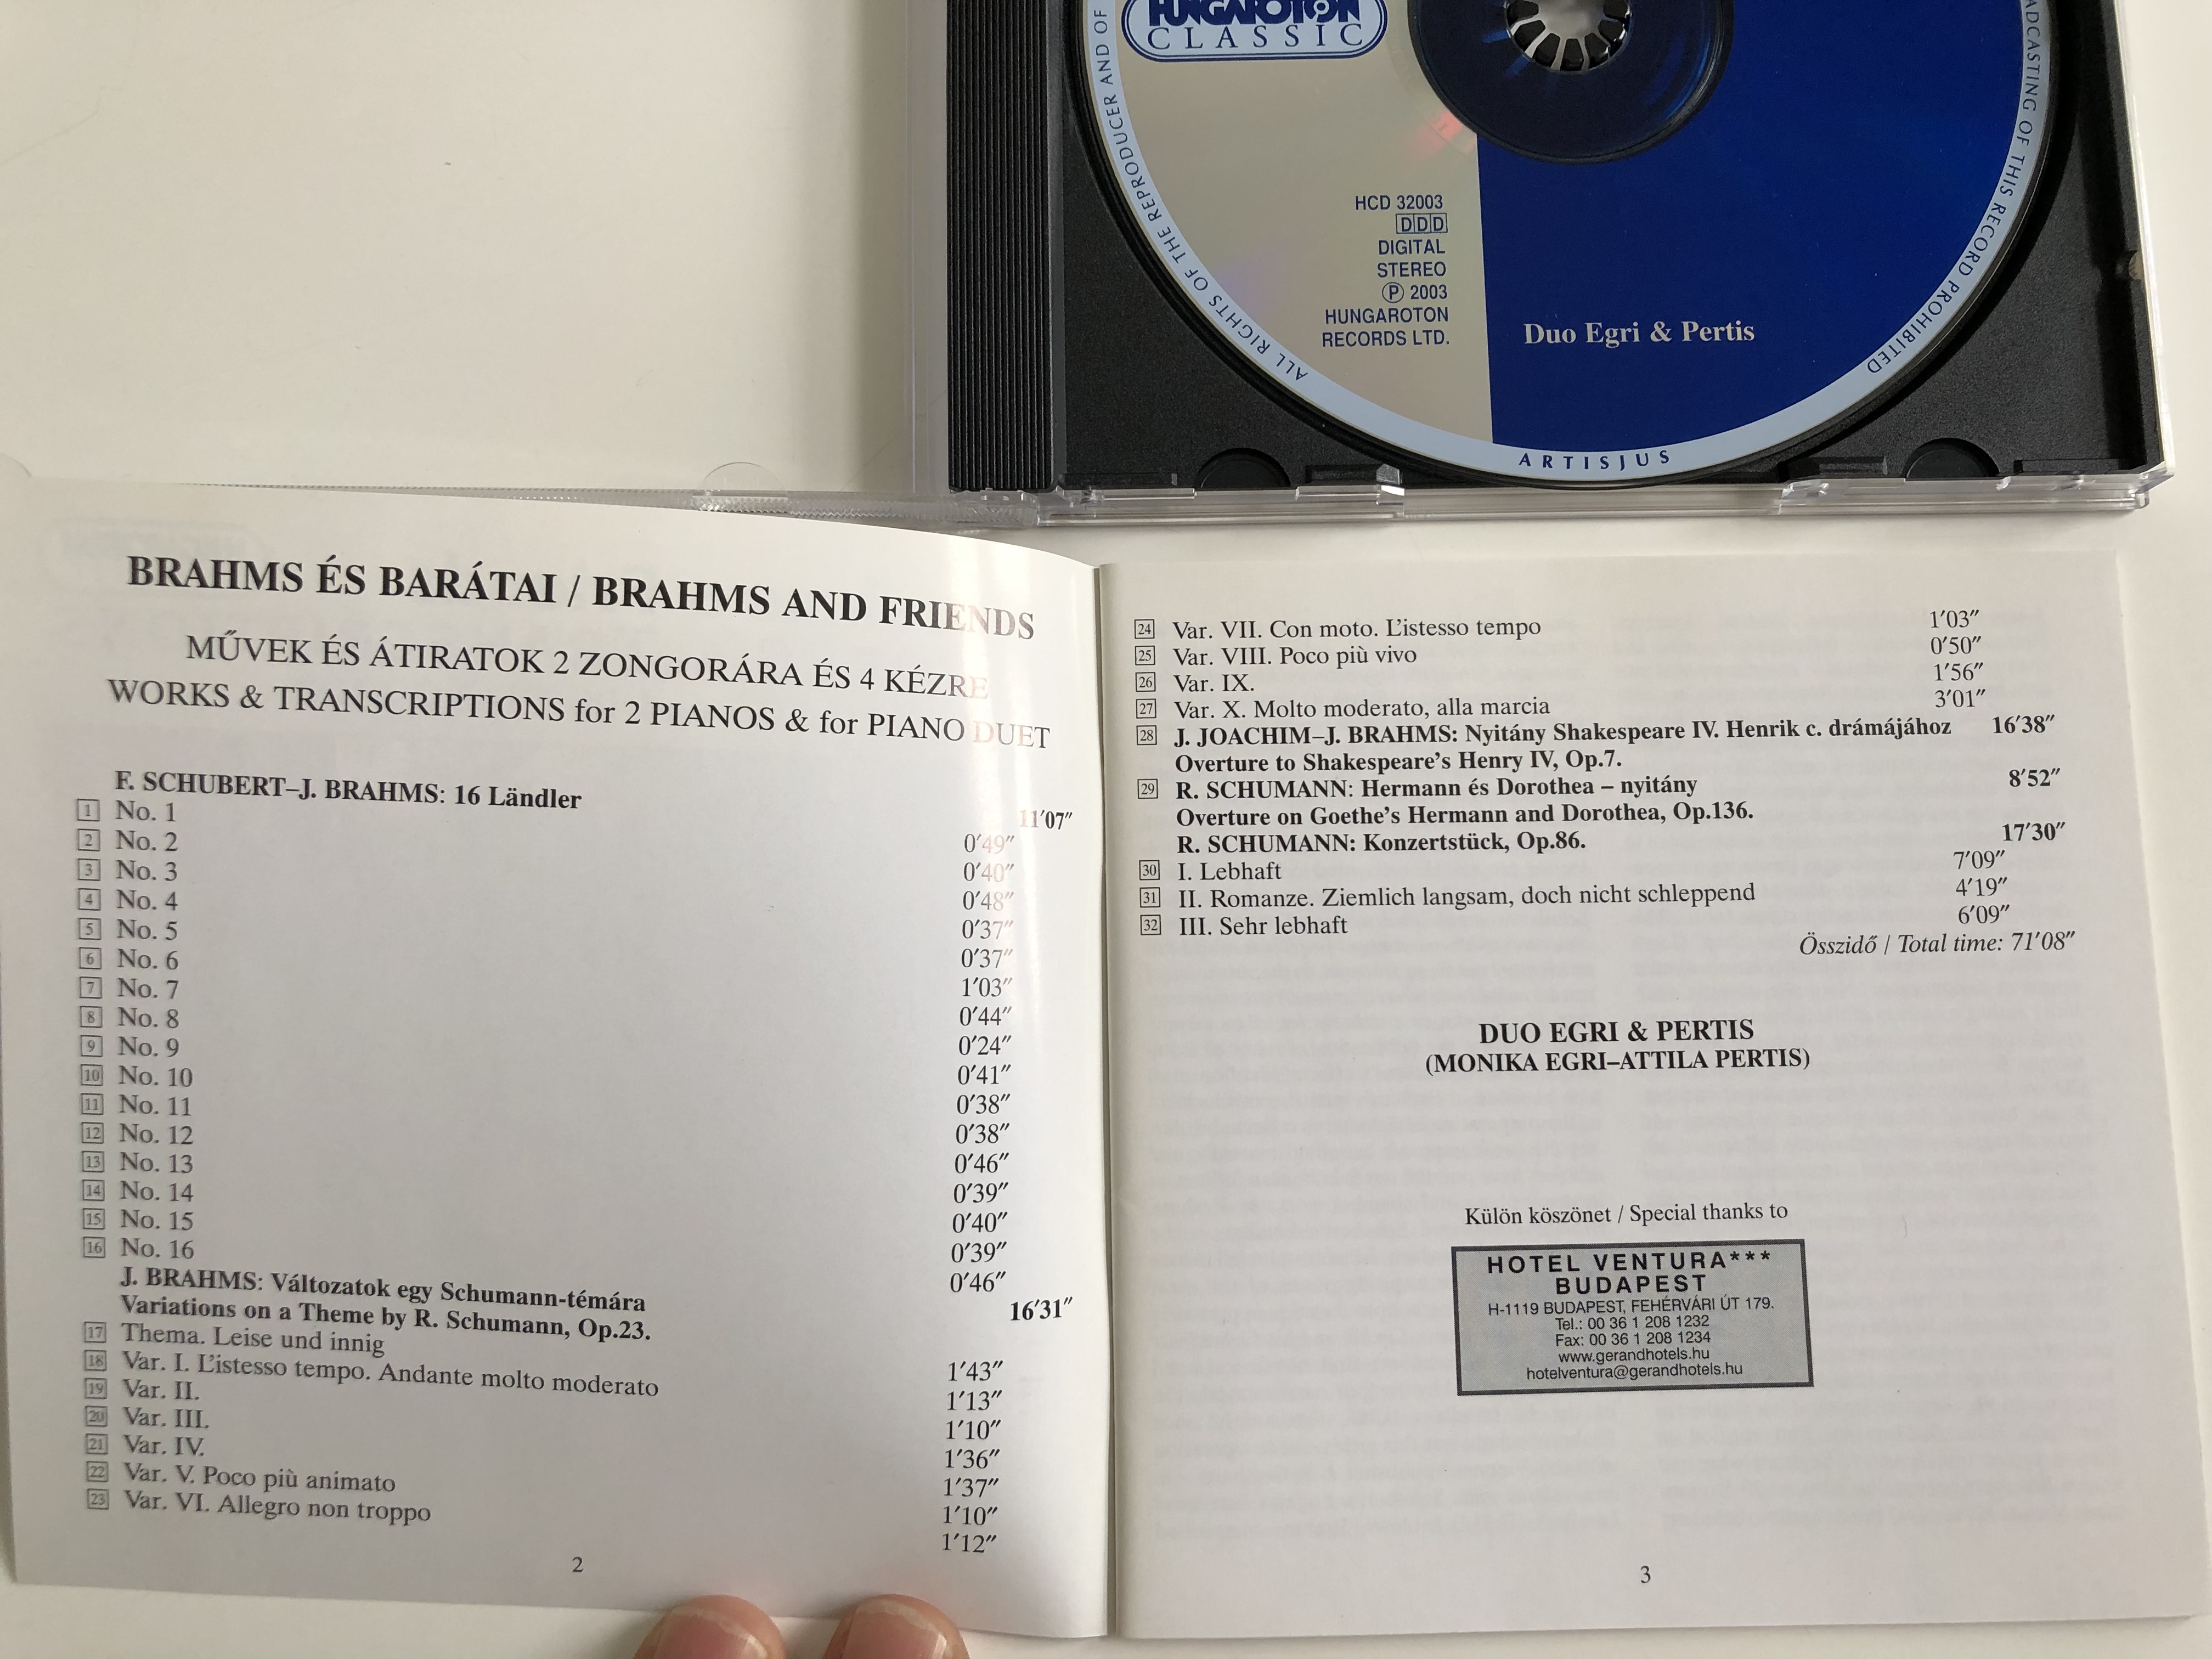 brahms-friends-works-transcriptioons-for-2-pianos-and-for-piano-duet-duo-egri-pertis-hungaroton-audio-cd-2003-stereo-hcd-32003-2-.jpg